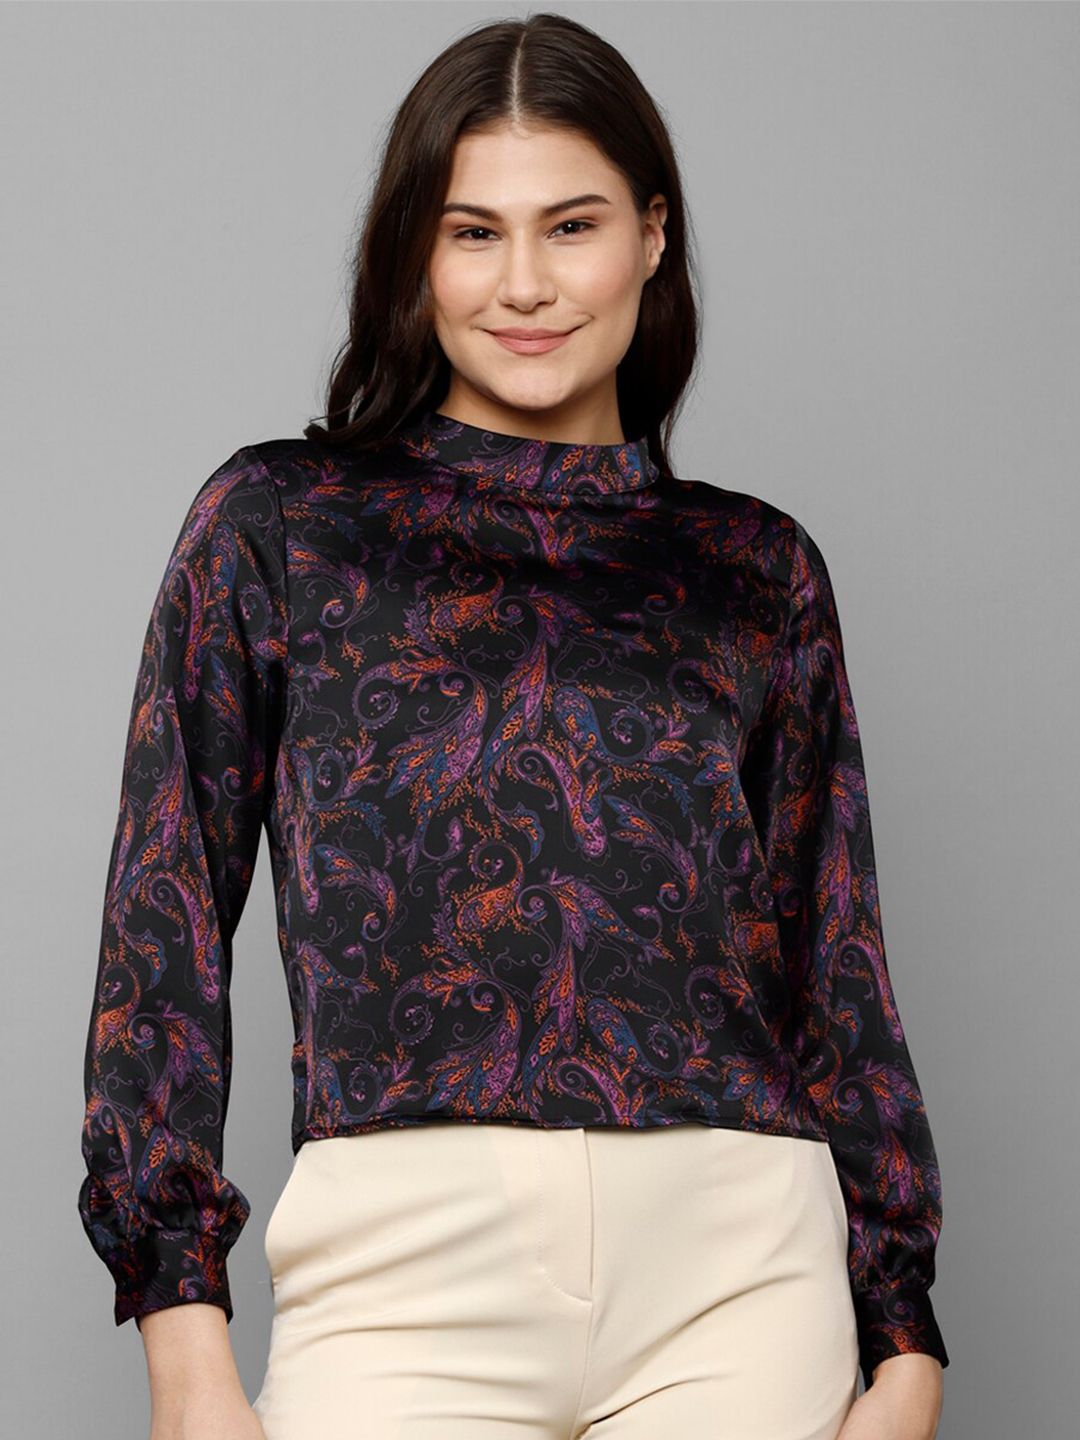 Allen Solly Woman Black Print Top Price in India